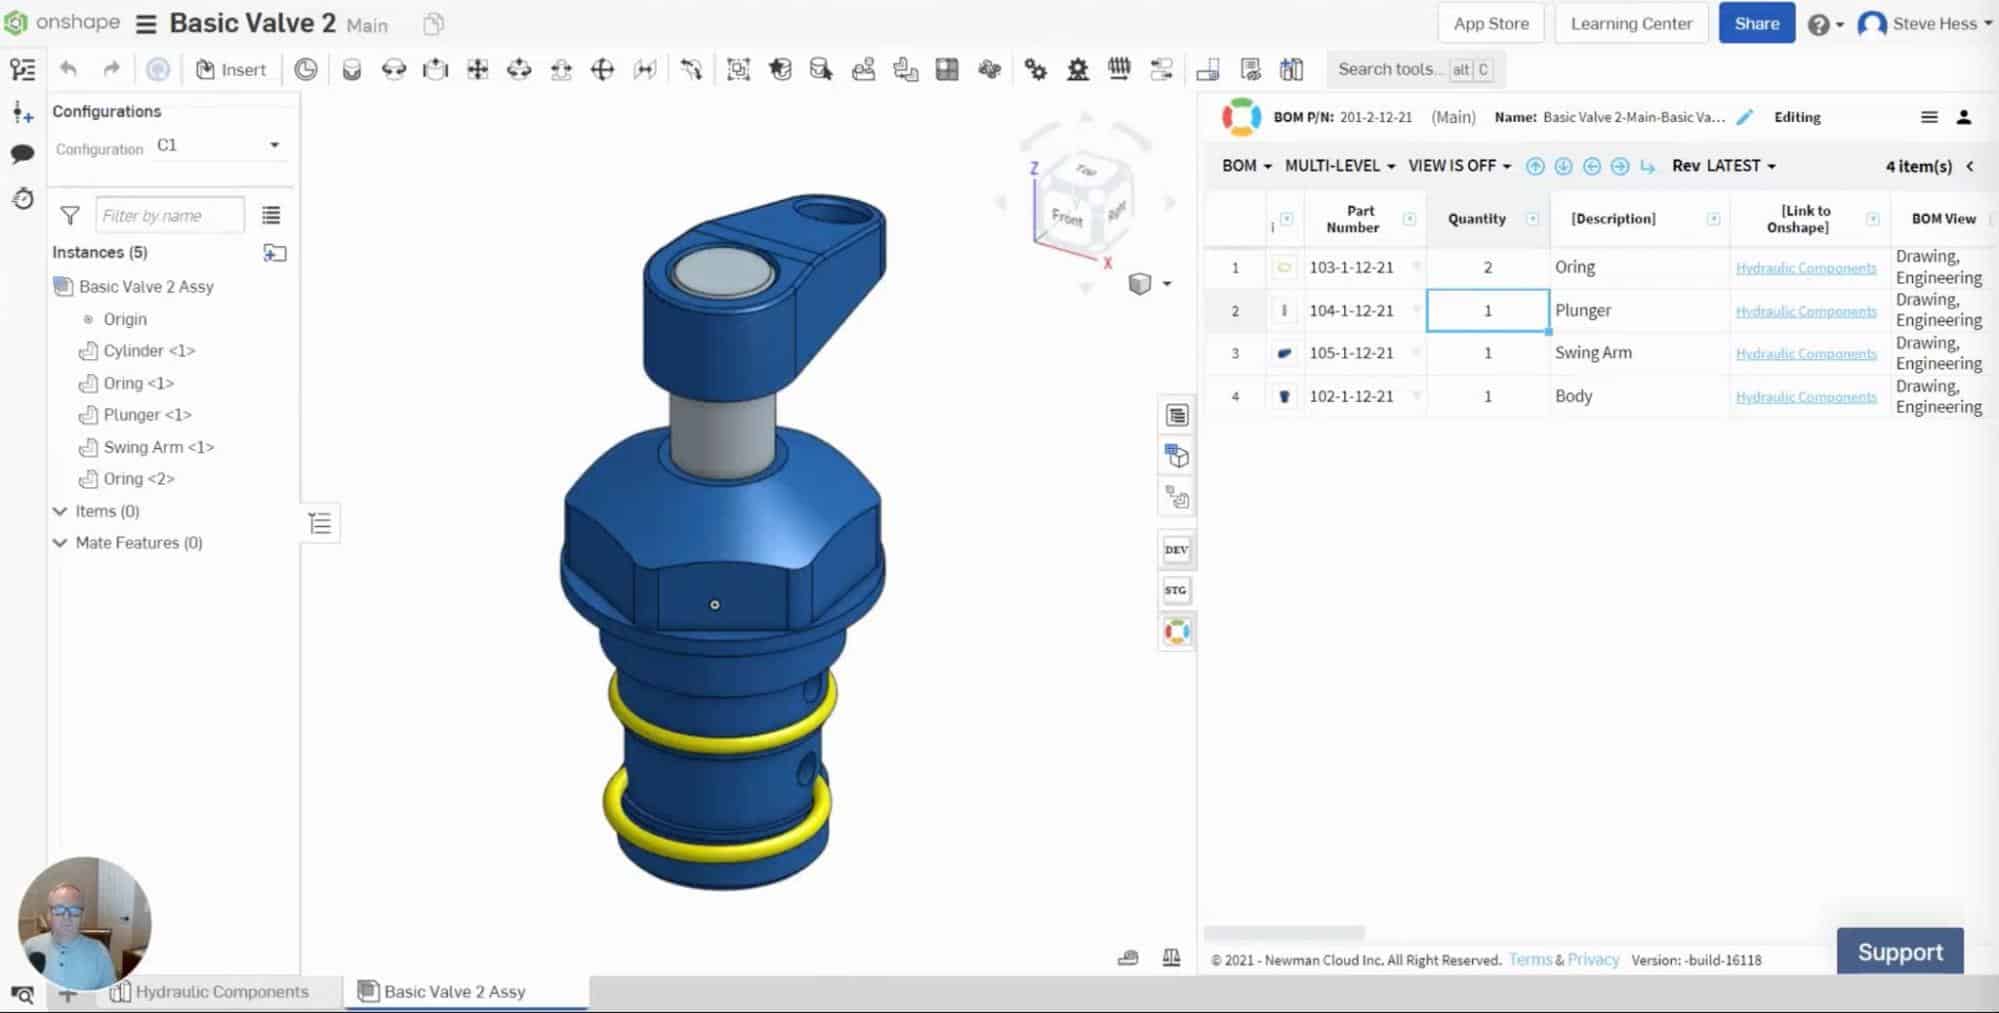 PREVIEW: Onshape “exclude from BOM” support